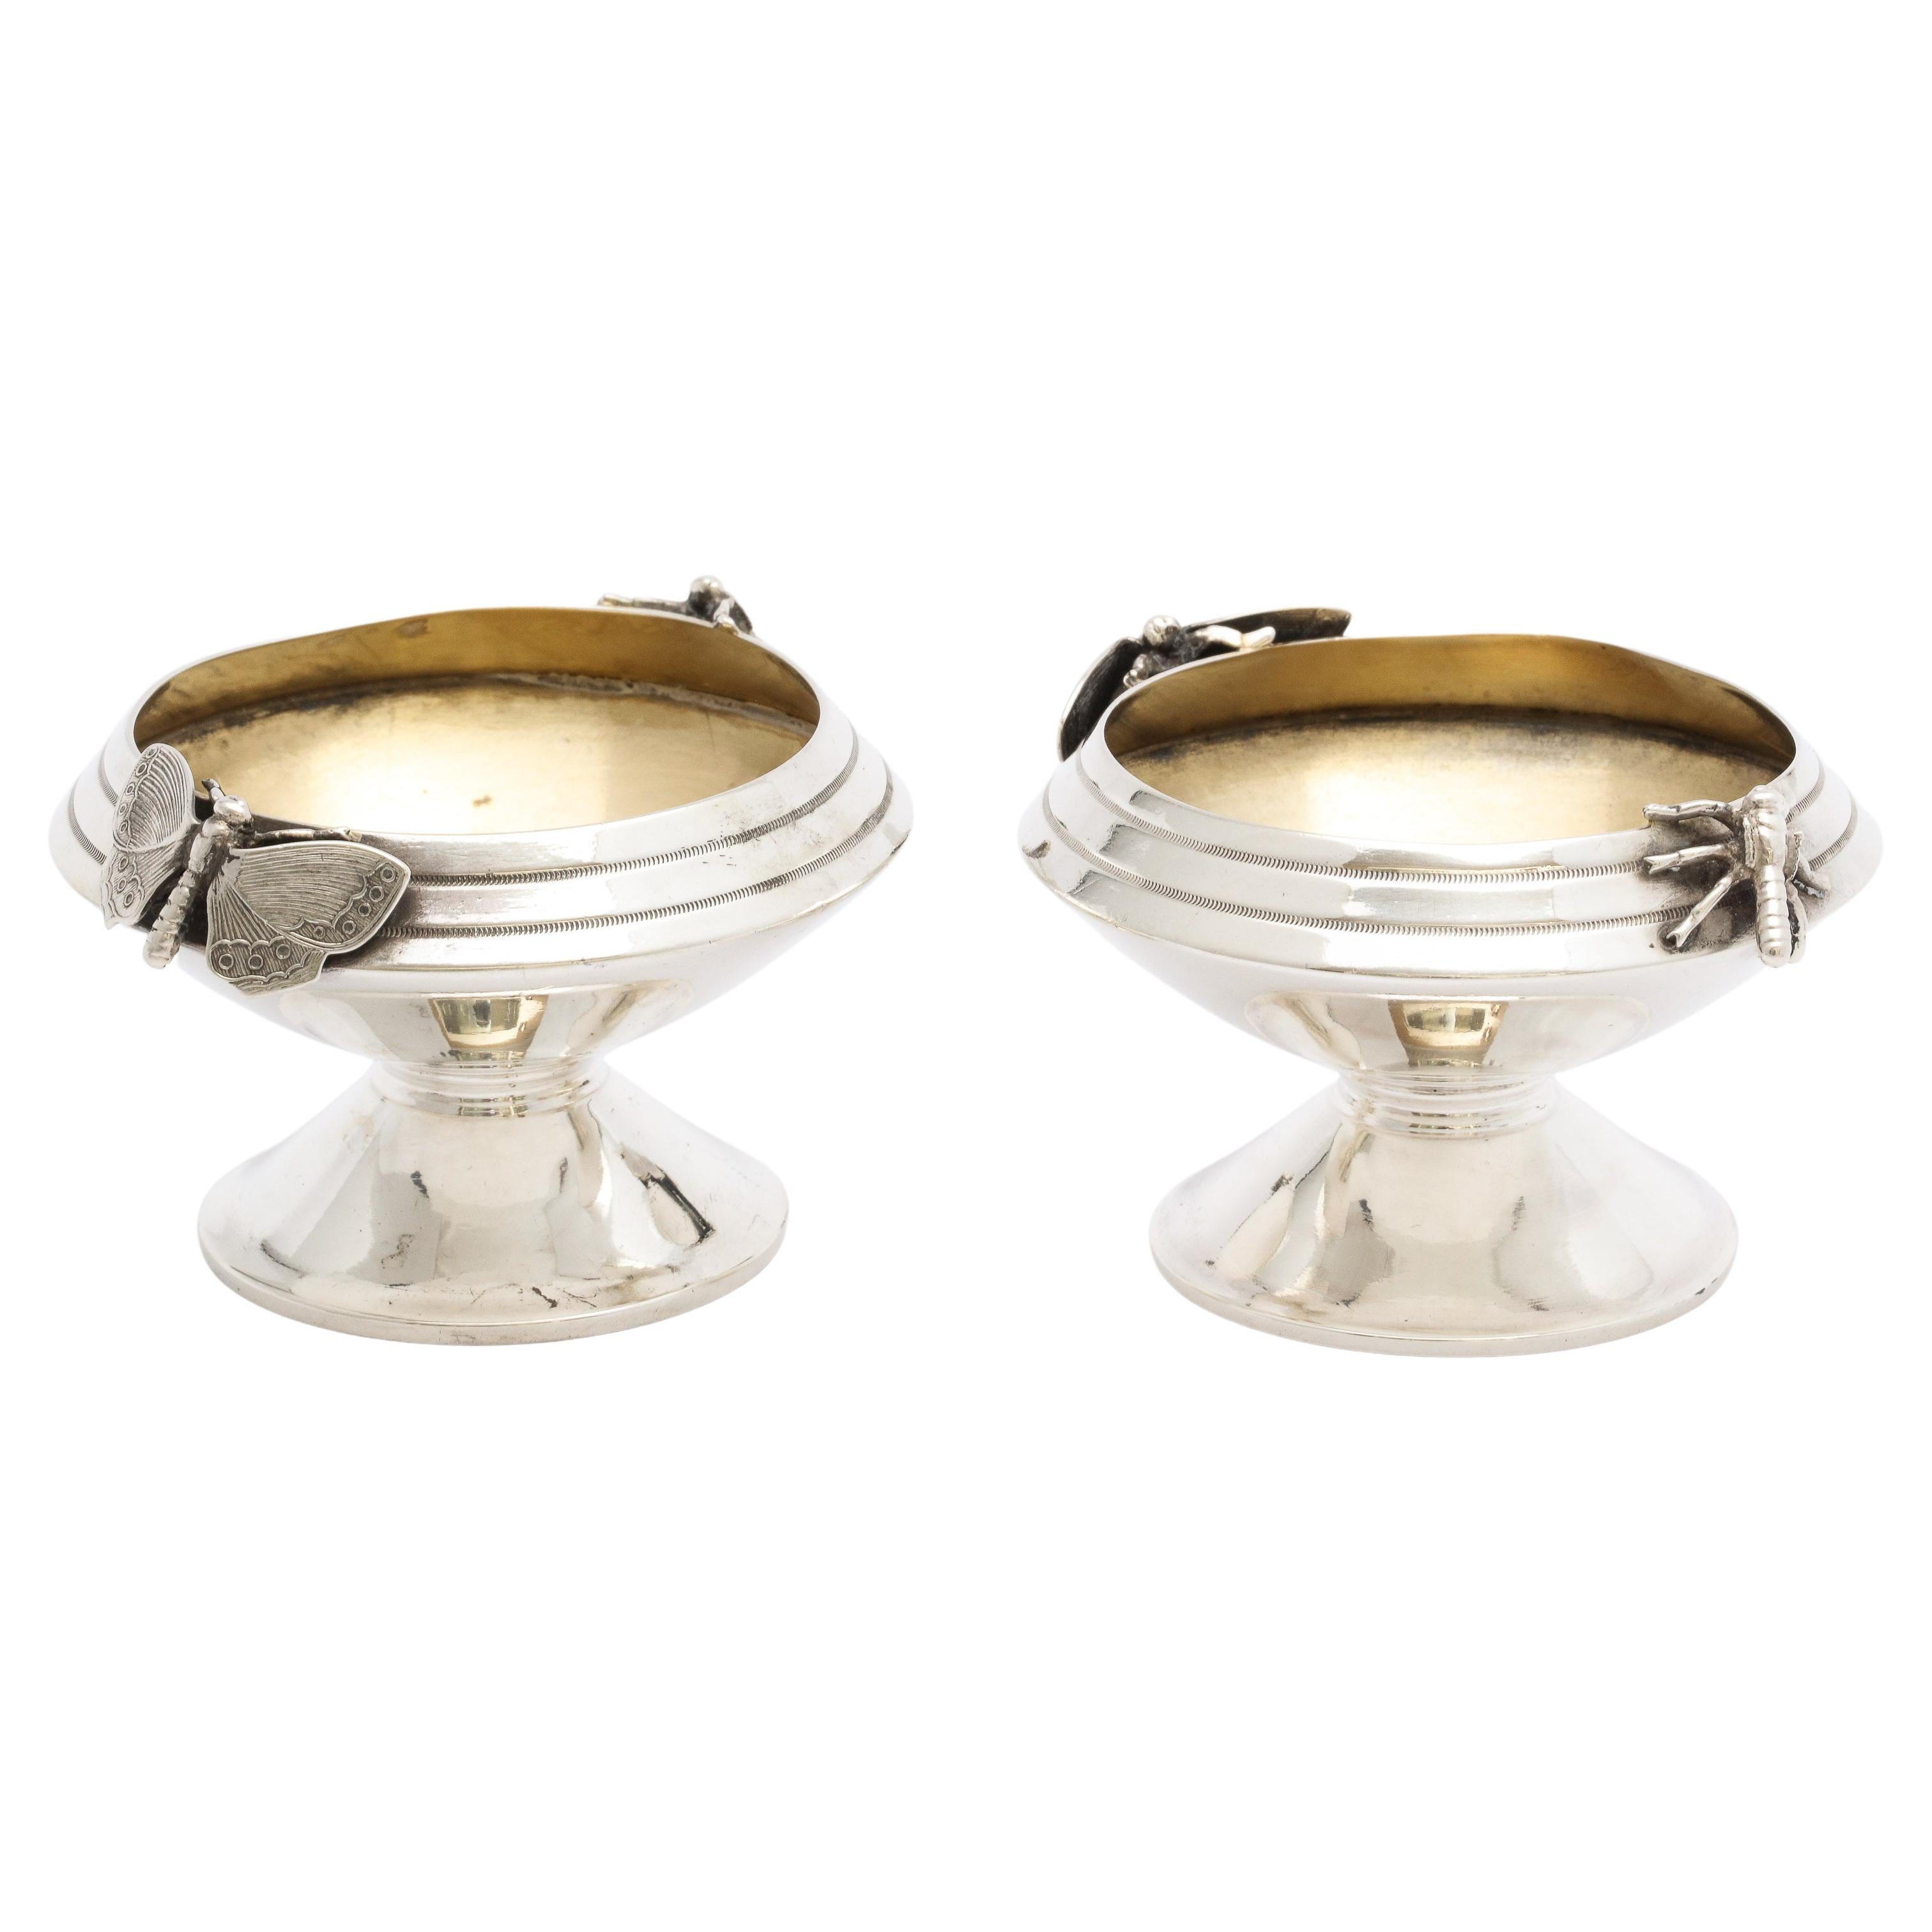 Pair of Aesthetic Movement Sterling Silver Salt Cellars by Gorham